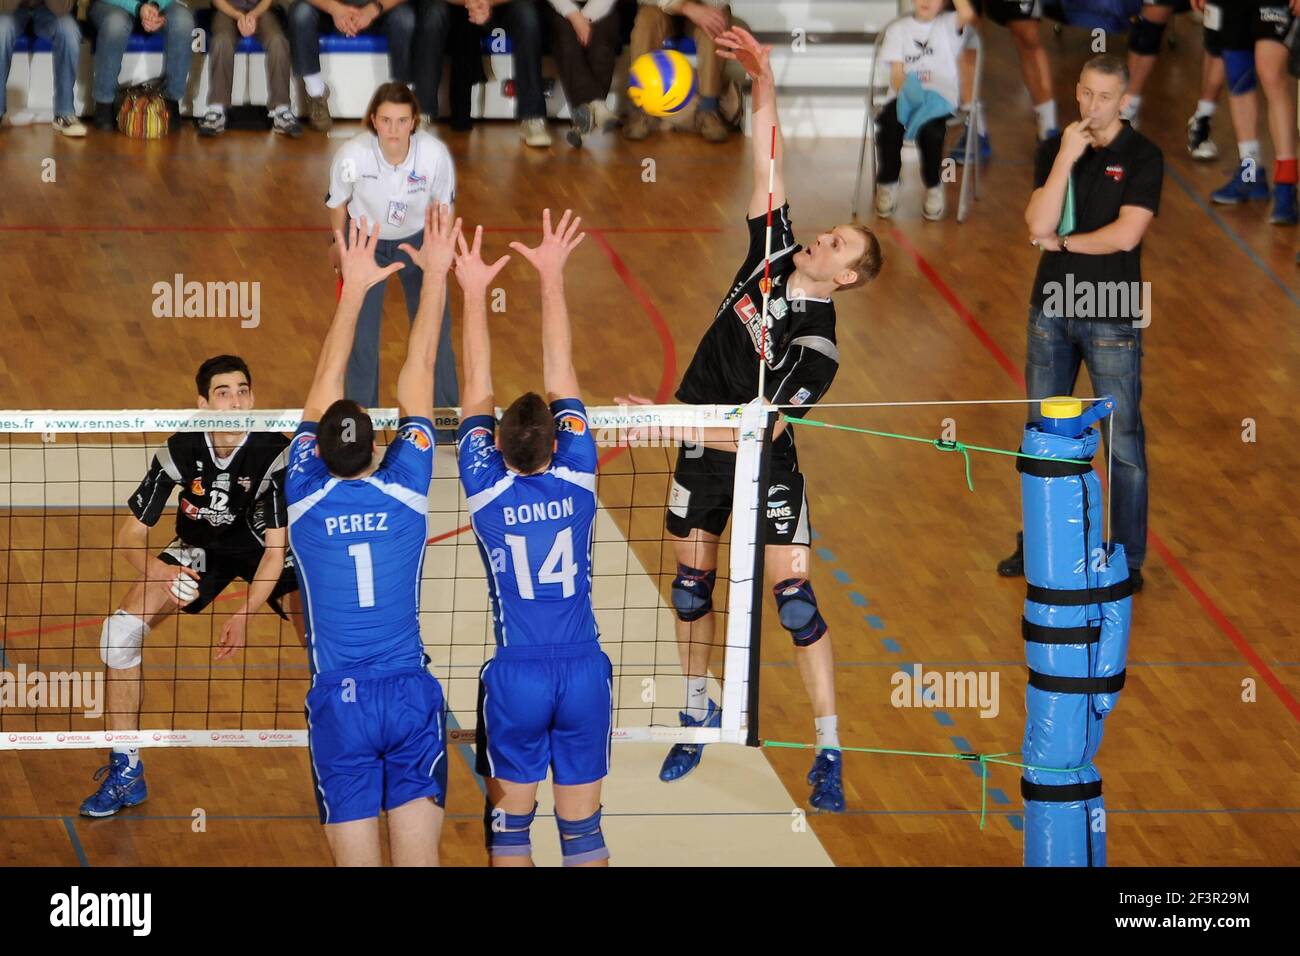 VOLLEYBALL - FRENCH CHAMPIONSHIP D1 MEN 2009/2010 - PARIS (FRA) - 23/01 ...